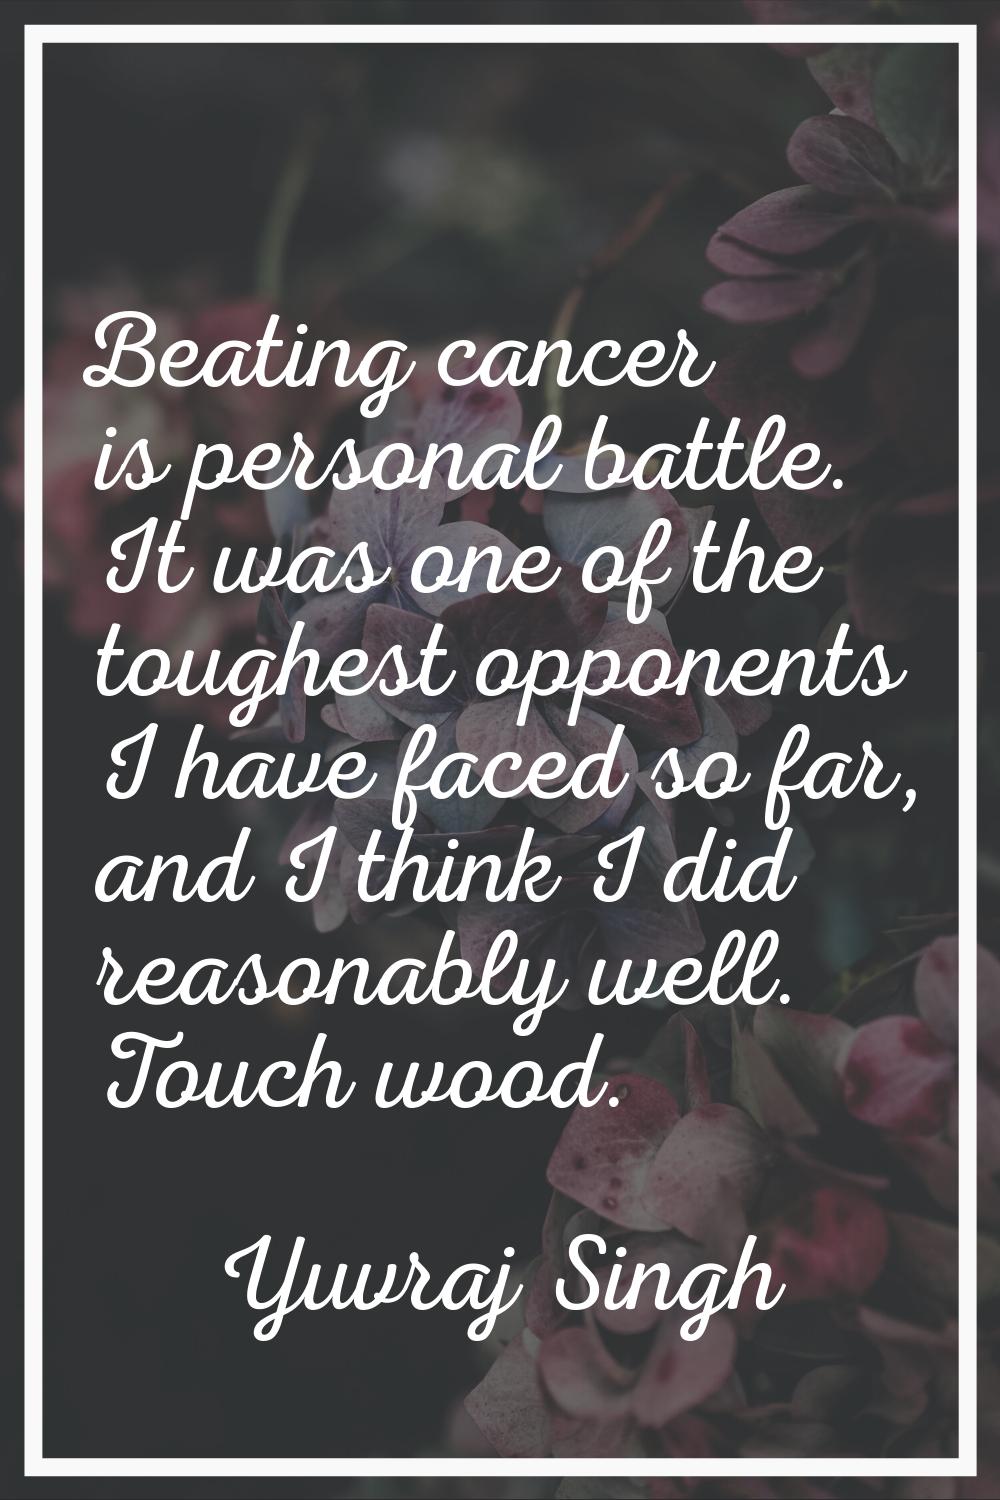 Beating cancer is personal battle. It was one of the toughest opponents I have faced so far, and I 